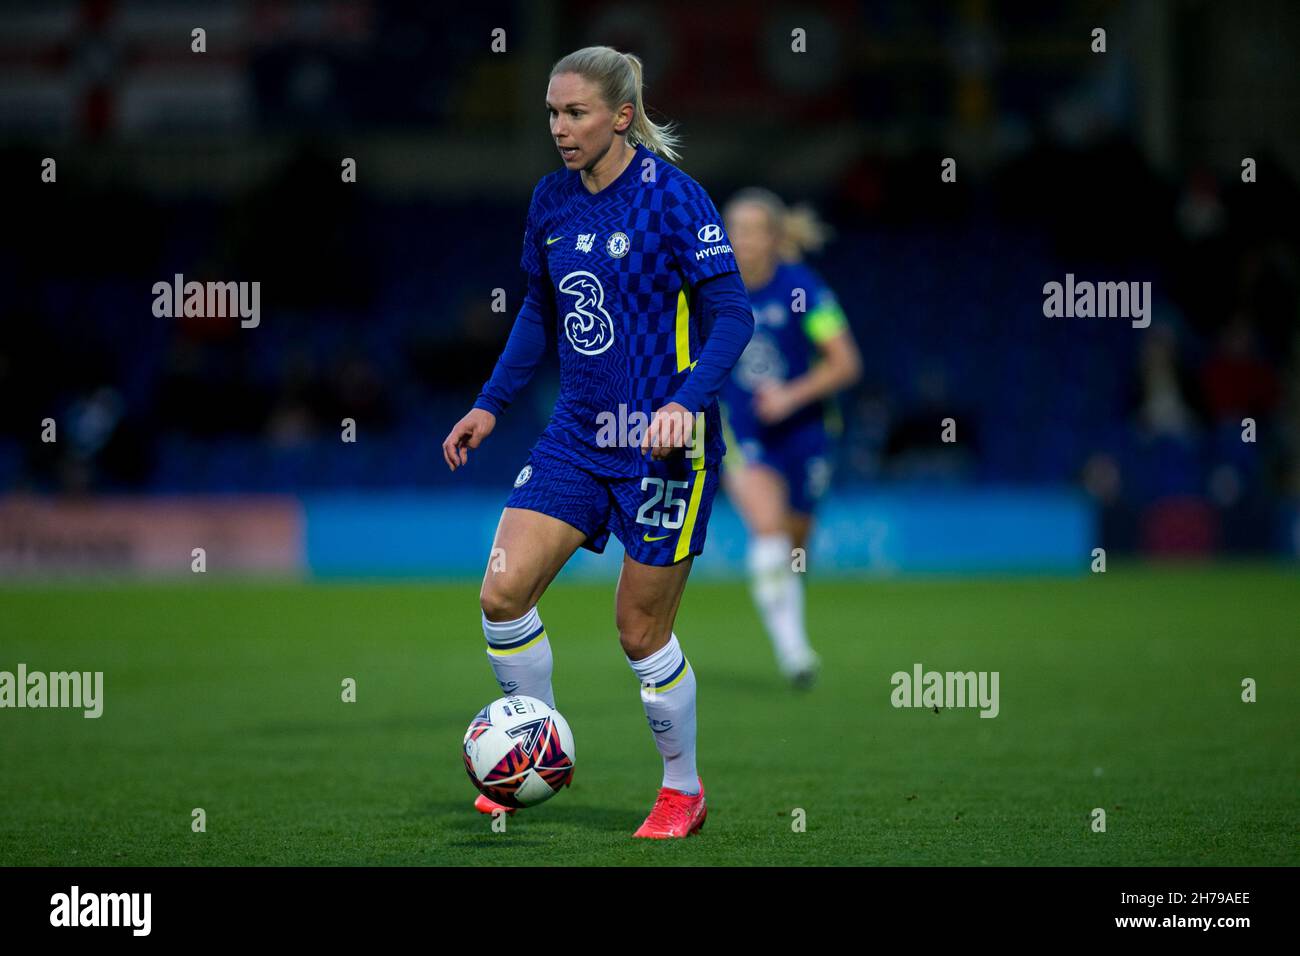 London, UK. 21st Nov, 2021. LONDON, UK. NOVEMBER 21ST : Jonna Andersson of Chelsea FC controls the ball during the 2021-22 FA Womens Superleague fixture between Chelsea FC and Birmingham City at Kingsmeadow. Credit: Federico Guerra Morán/Alamy Live News Stock Photo